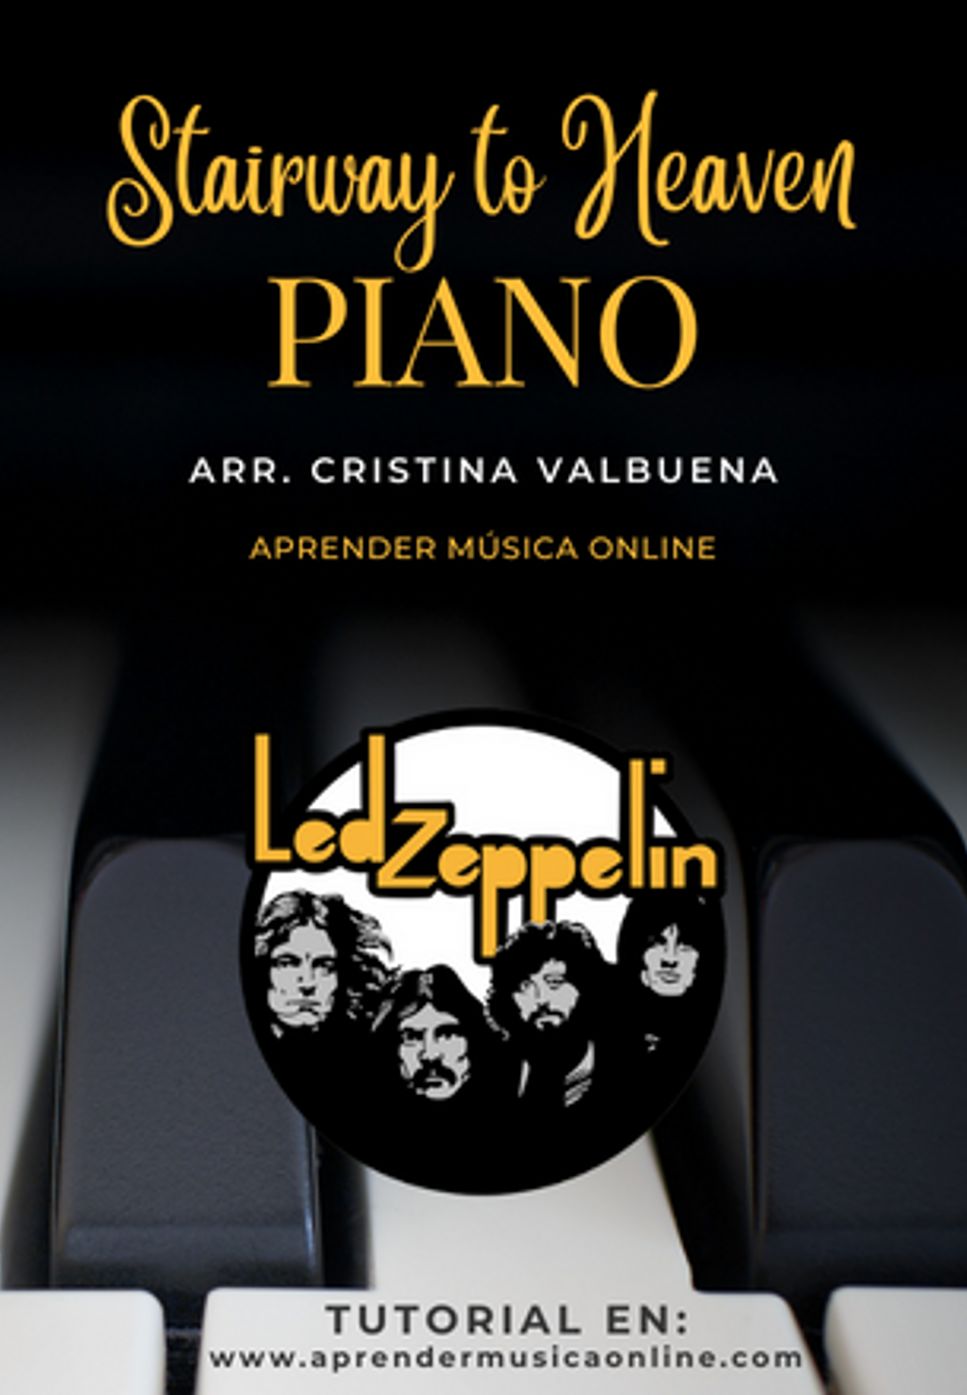 Led Zeppelin - Stairway to Heaven by Cristina Valbuena